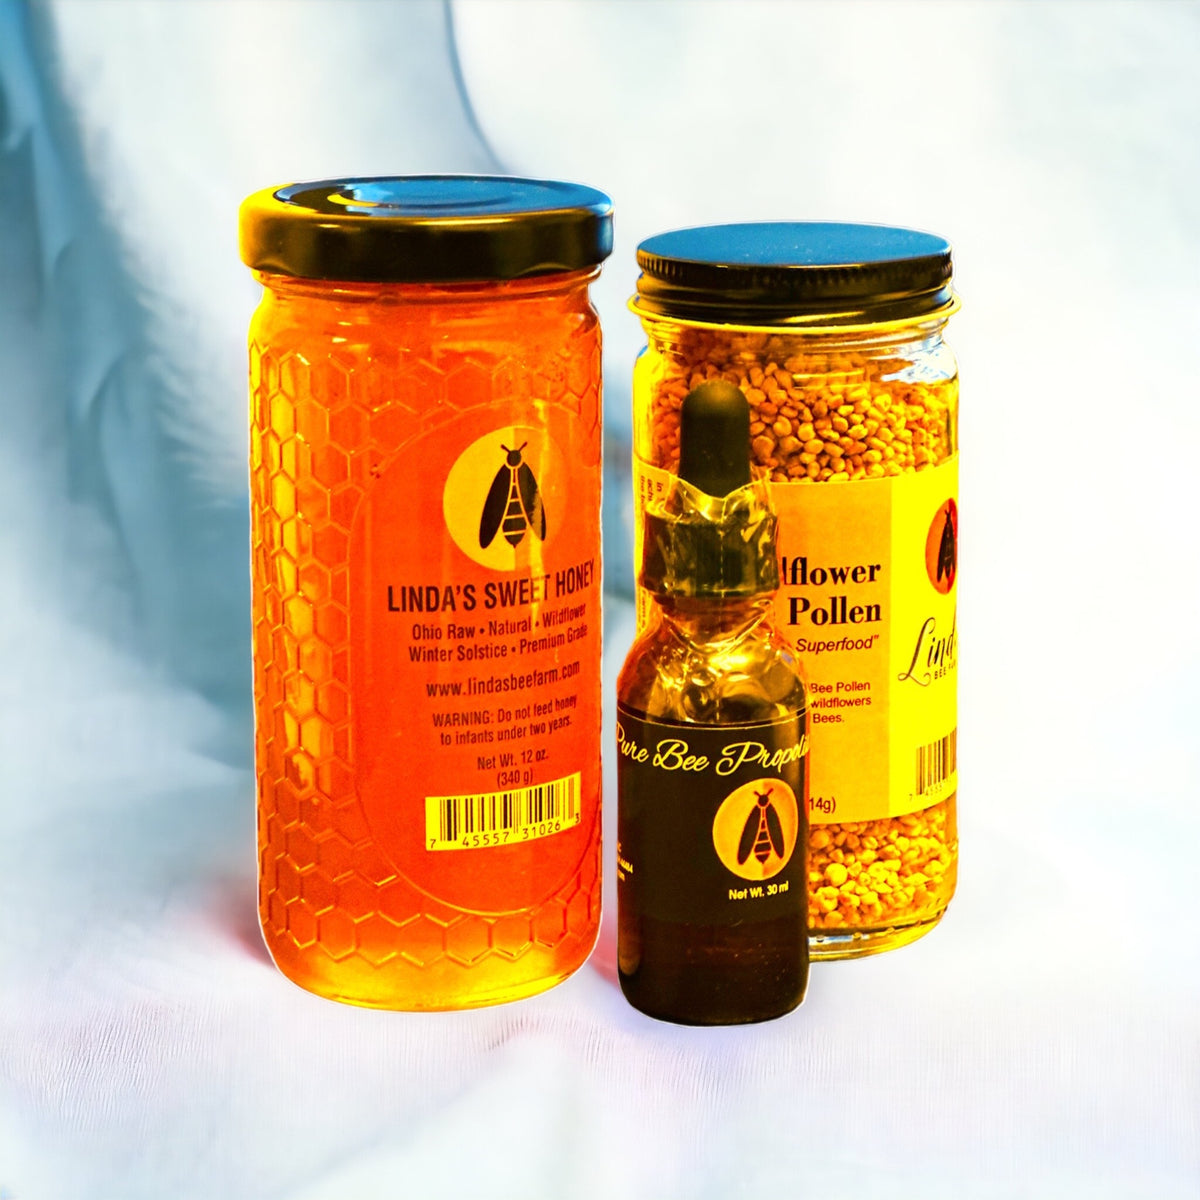 Raw Honeycomb. Raw Honey Comb Filled With Pure Honey Real Comb Honey, Raw  Food, 12-16oz 